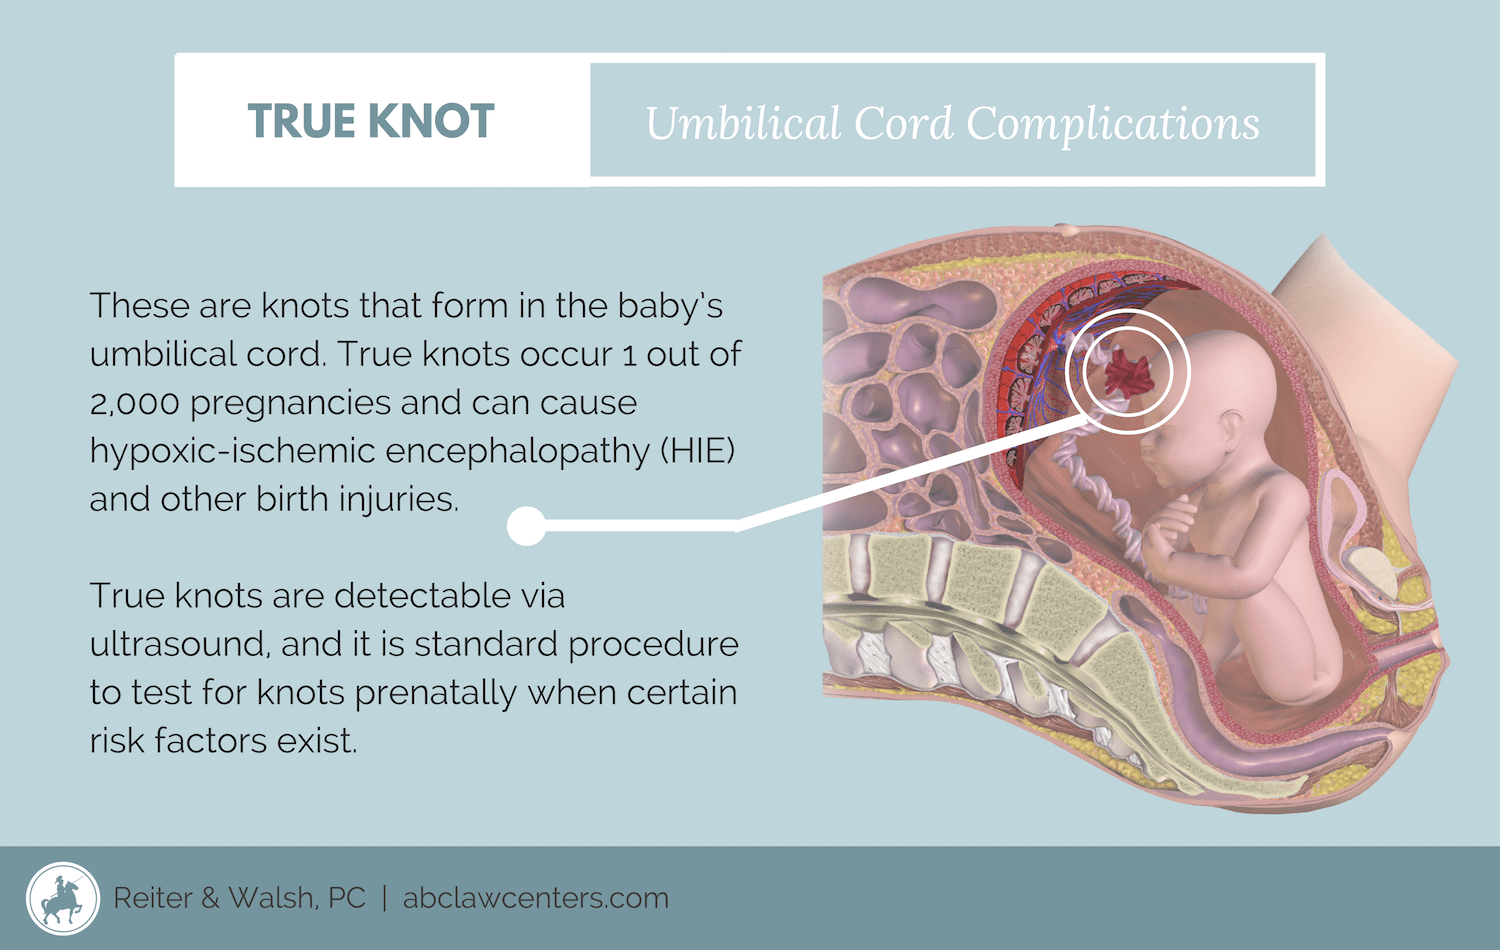 true knot in the umbilical cord